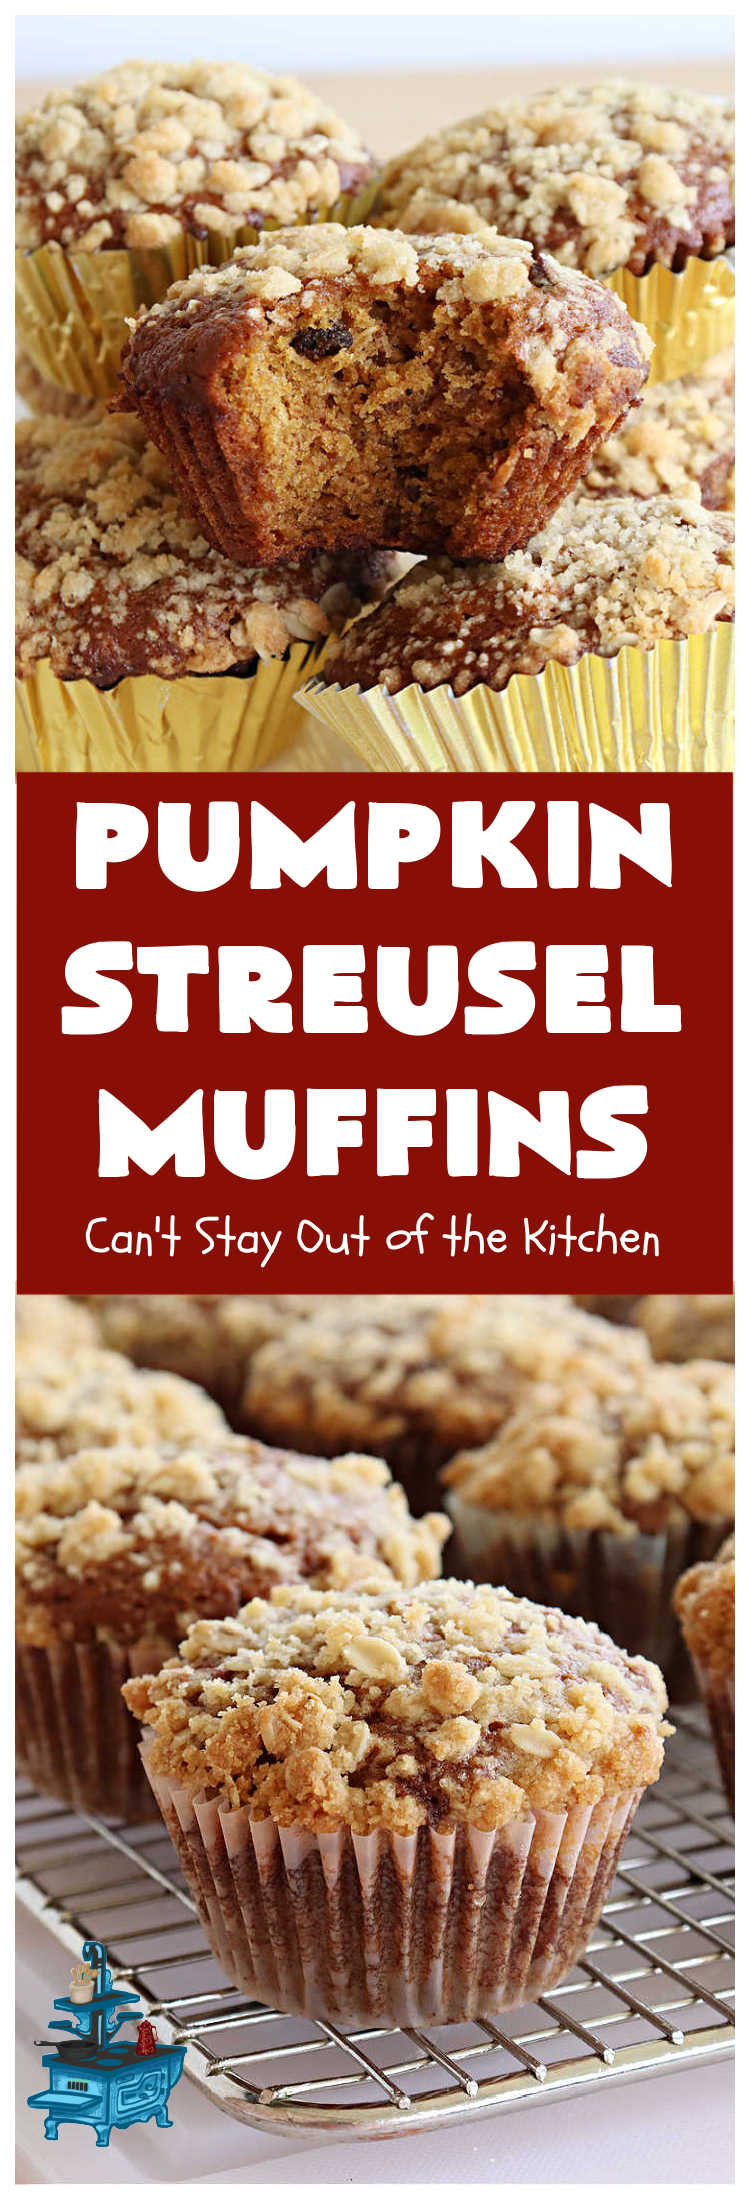 Pumpkin Streusel Muffins | Can't Stay Out of the Kitchen | these hearty #muffins just burst with scrumptious #pumpkin flavor. The #StreuselTopping puts them over-the-top. #PumpkinMuffins don't have to be made only in the fall! Enjoy these delicious treats any time of the year for weekend, company or a #holiday #breakfast. #PumpkinStreuselMuffins